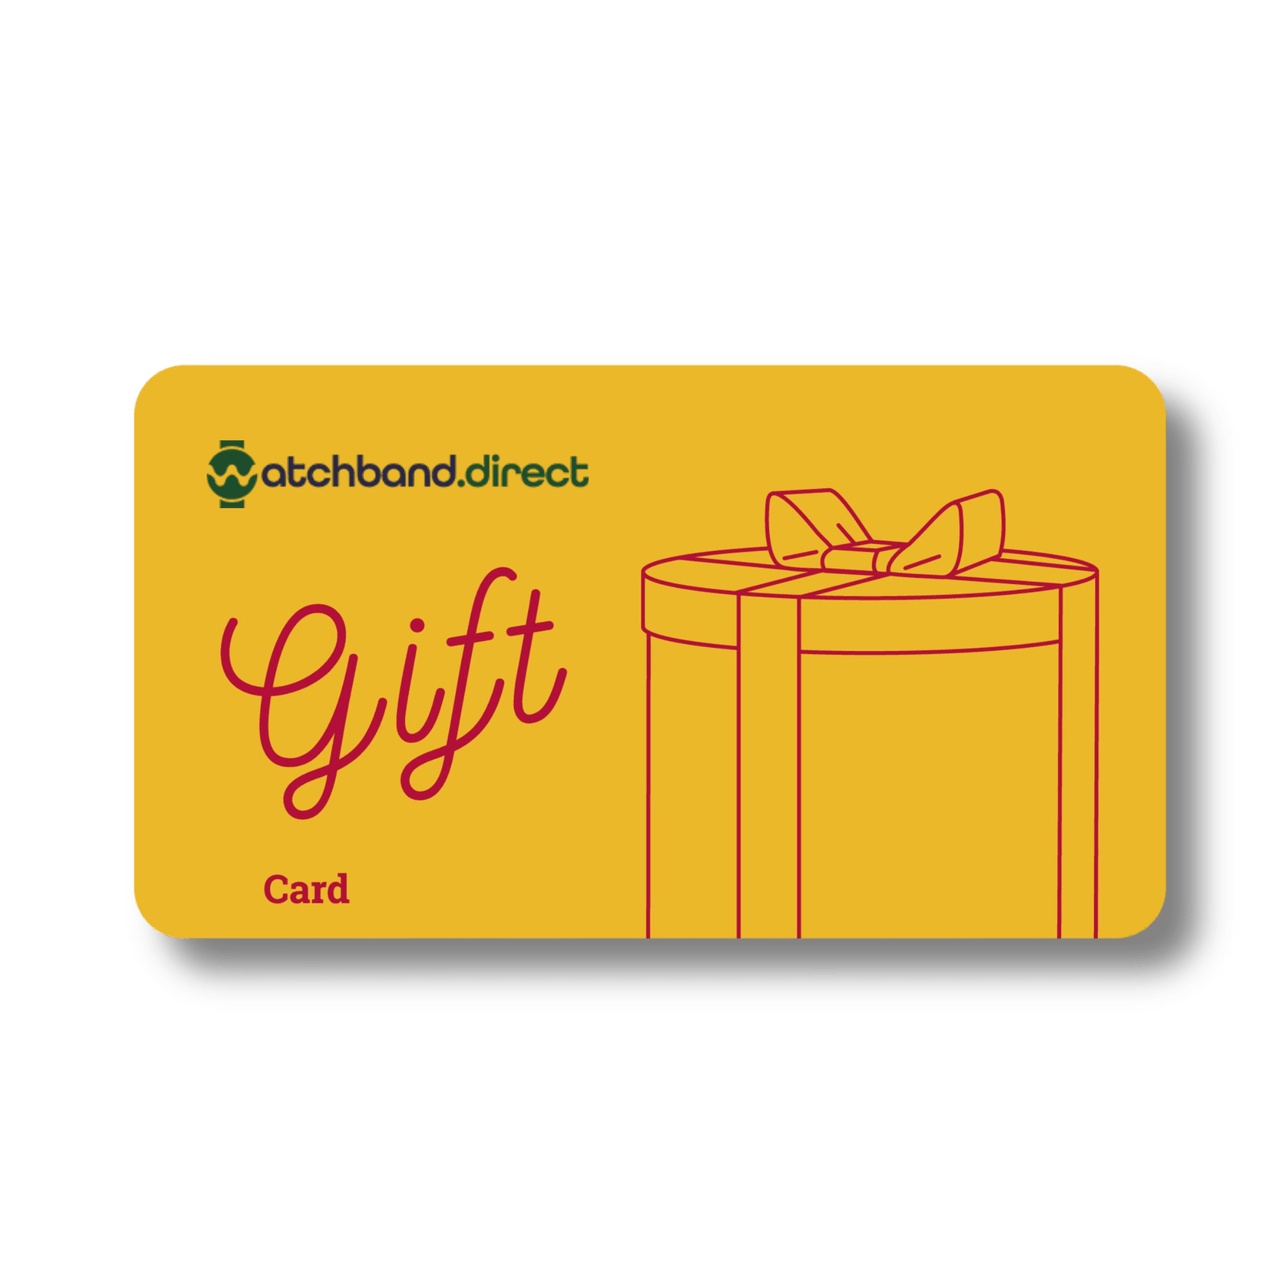 WatchBand.Direct Value Gift Card - watchband.direct